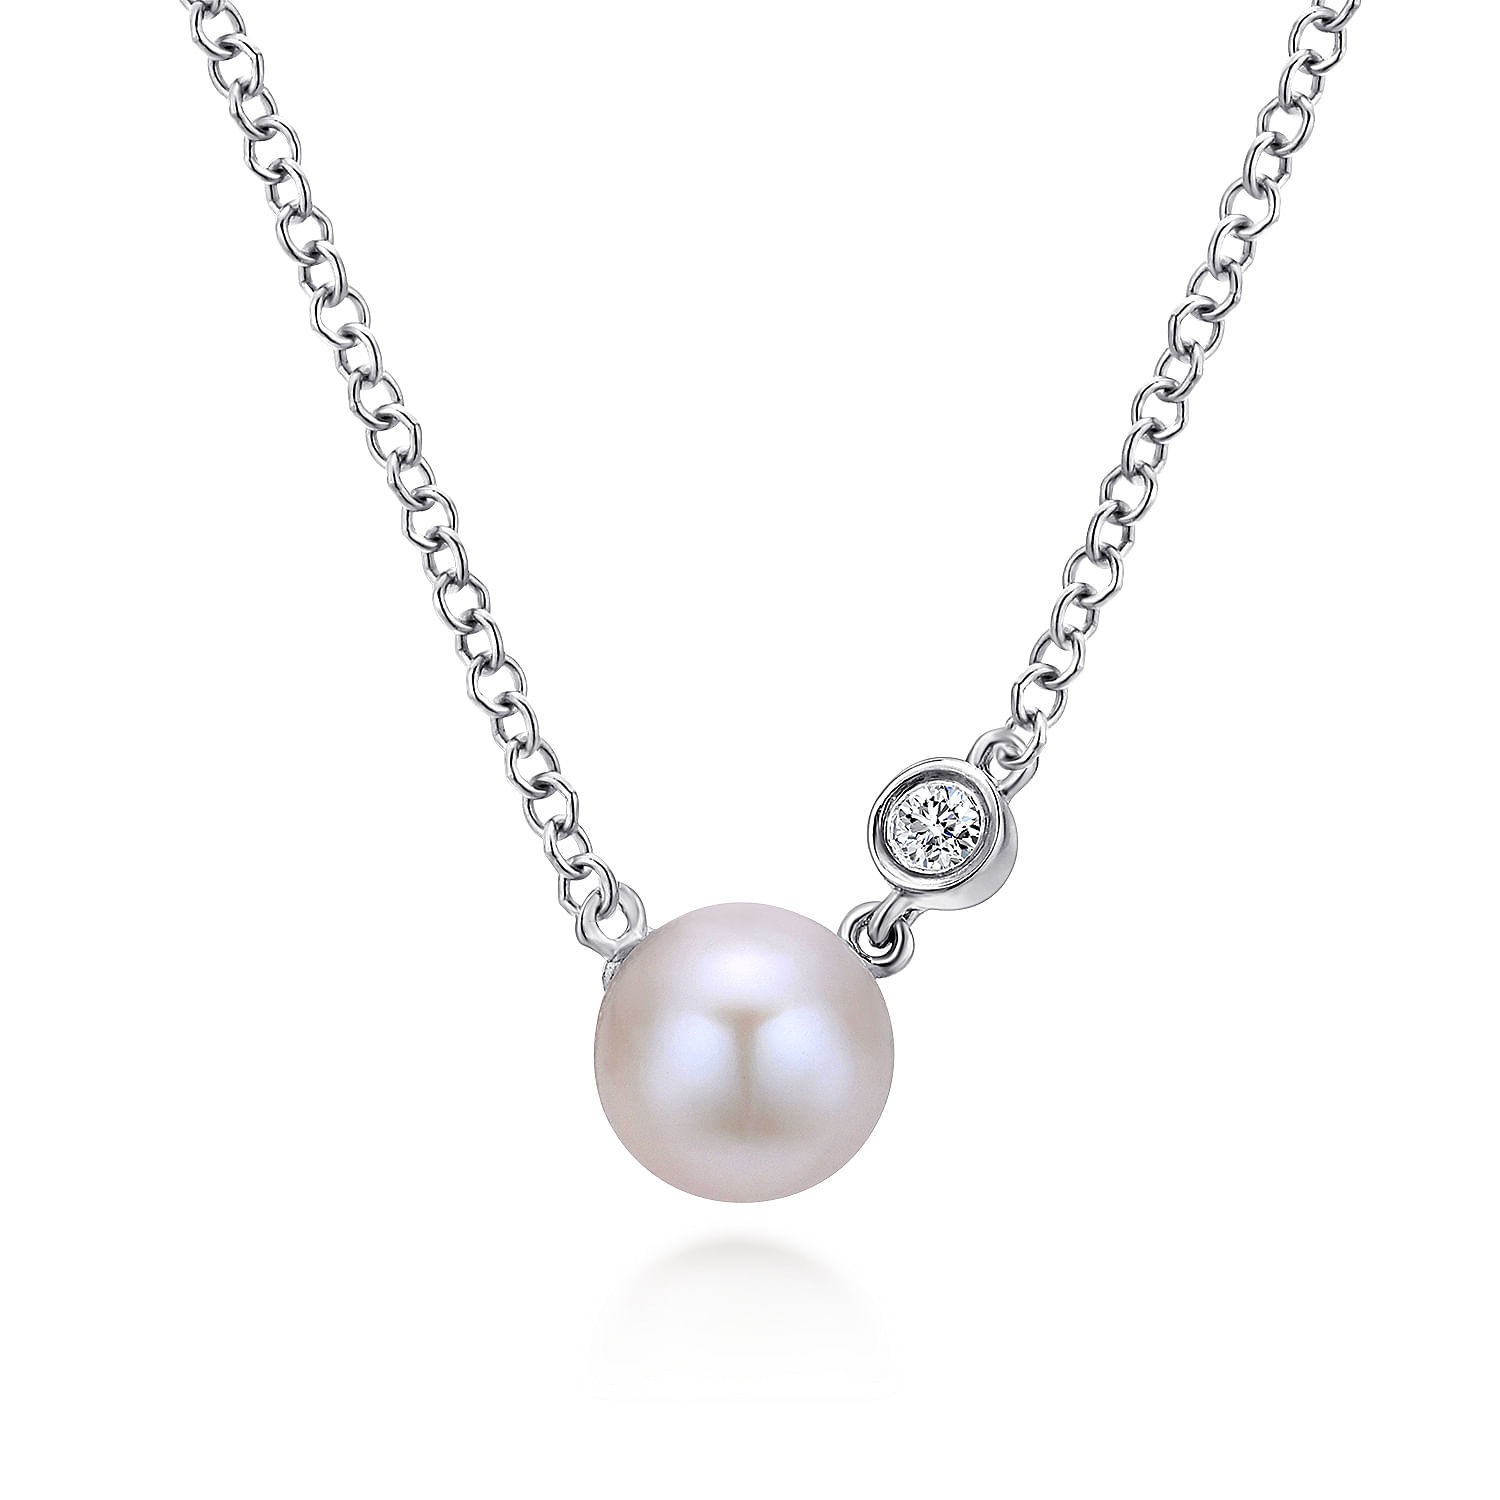 Gabriel - 925 Sterling Silver Cultured Pearl and Pendant Diamond Necklace